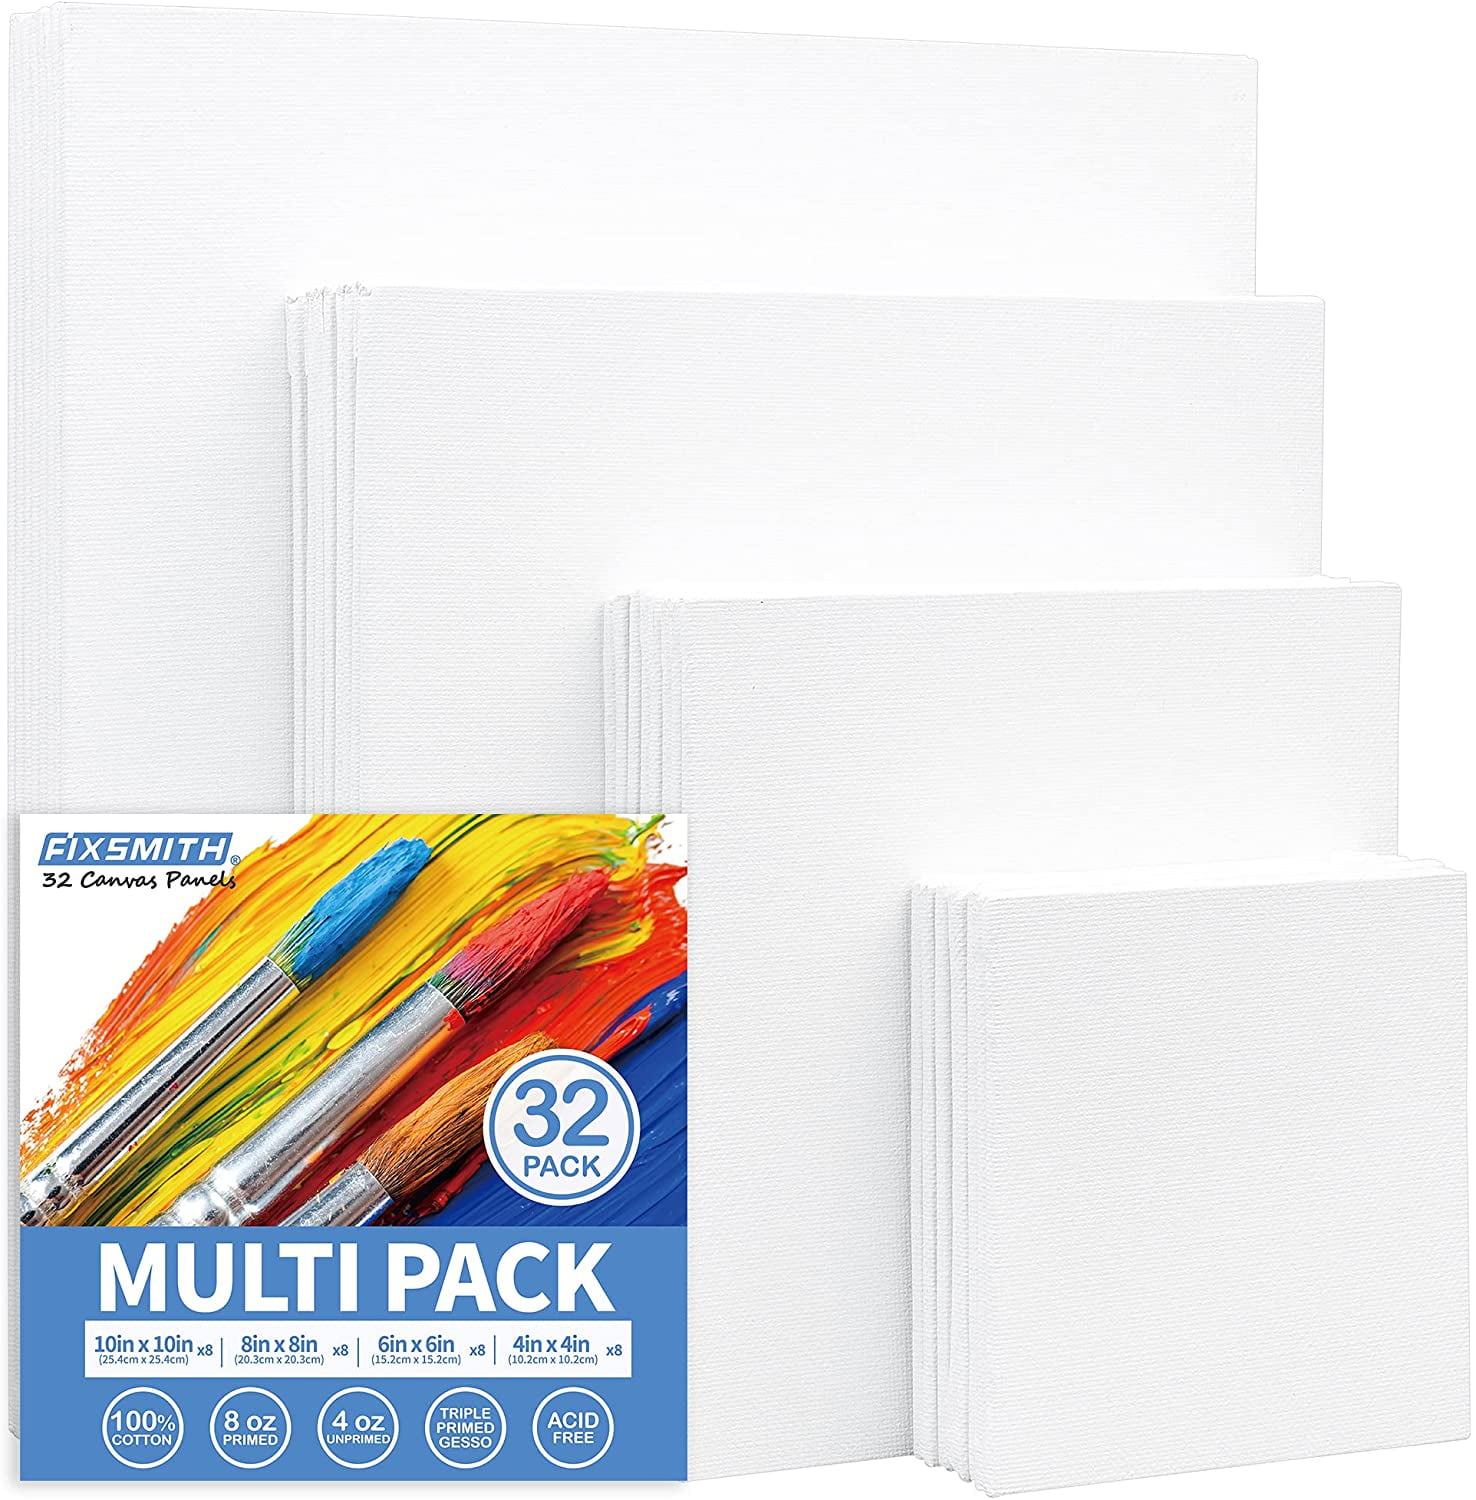  FIXSMITH Painting Canvas Panel Boards - 5x5 Inch Art Canvas,24  Pack Mini Canvases,Primed Canvas Panels,100% Cotton,Acid Free,Professional  Quality Artist Canvas Board for Hobby Painters,Students & Kids